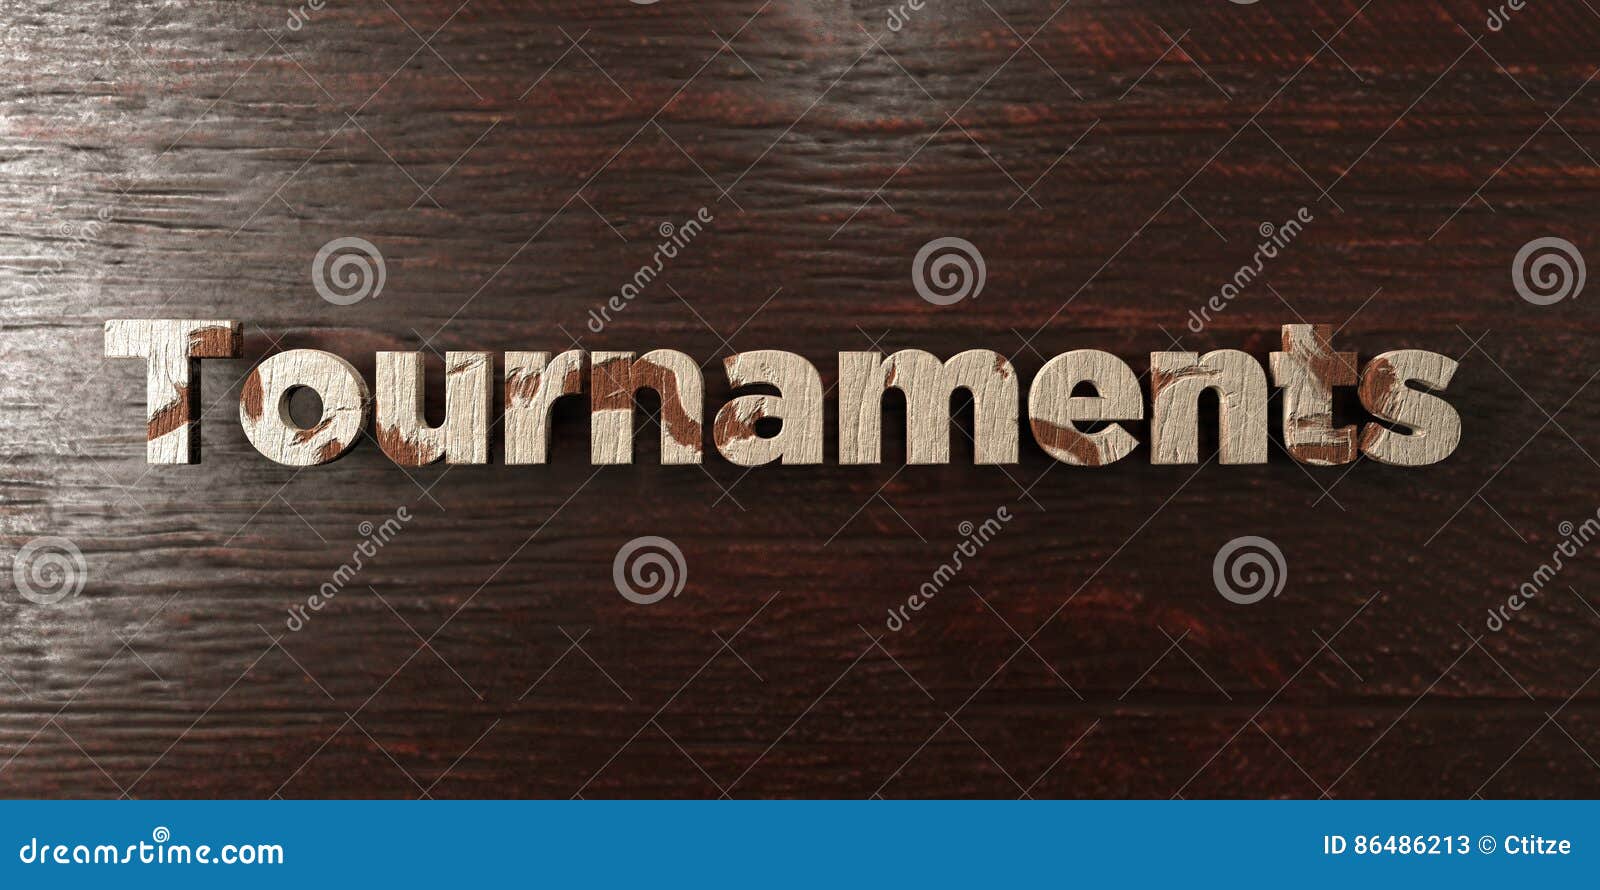 tournaments - grungy wooden headline on maple - 3d rendered royalty free stock image